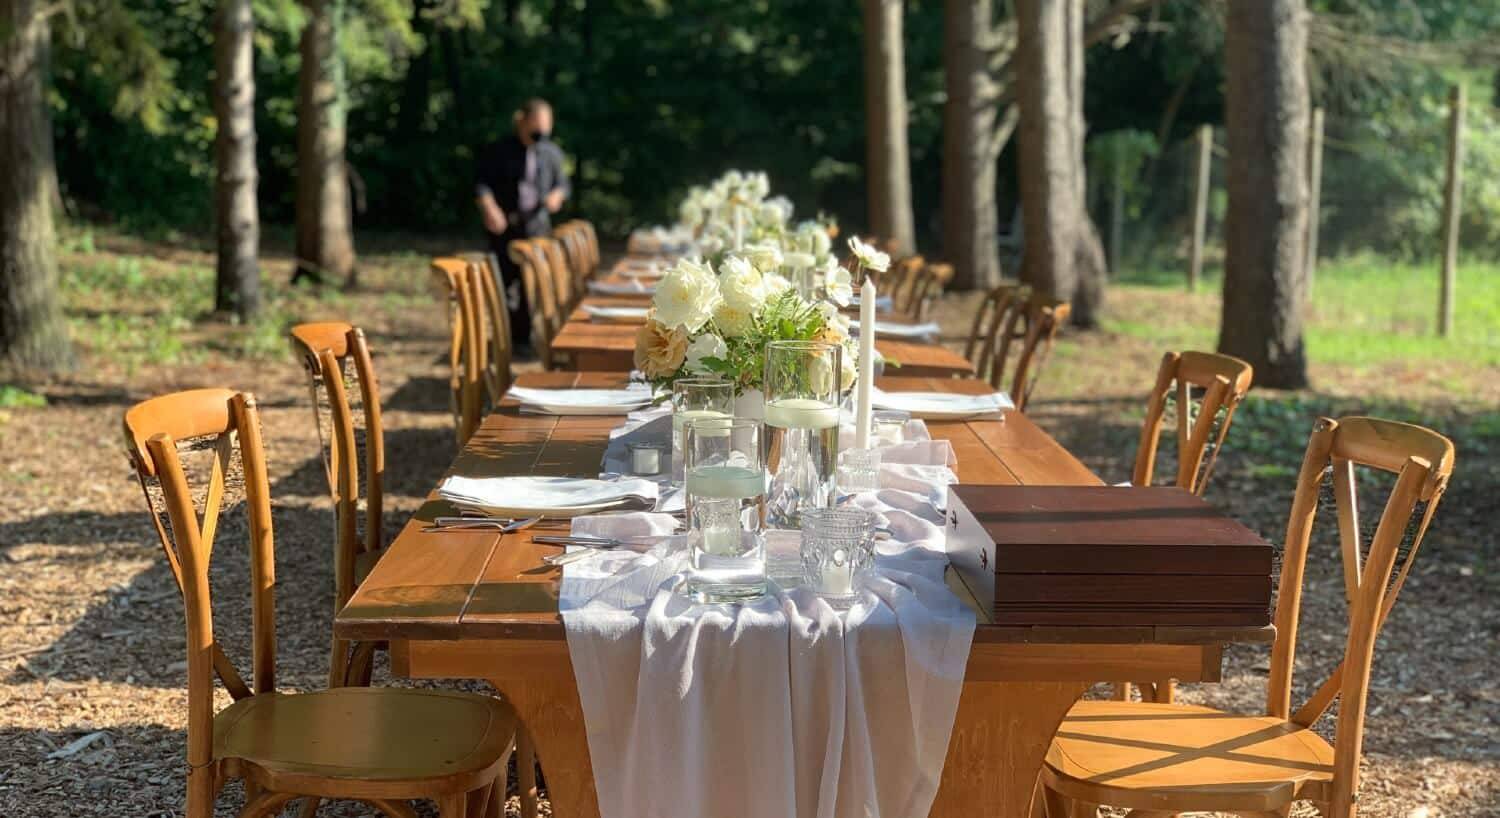 A long wood table set up outside with a white runner and several vases of white flowers